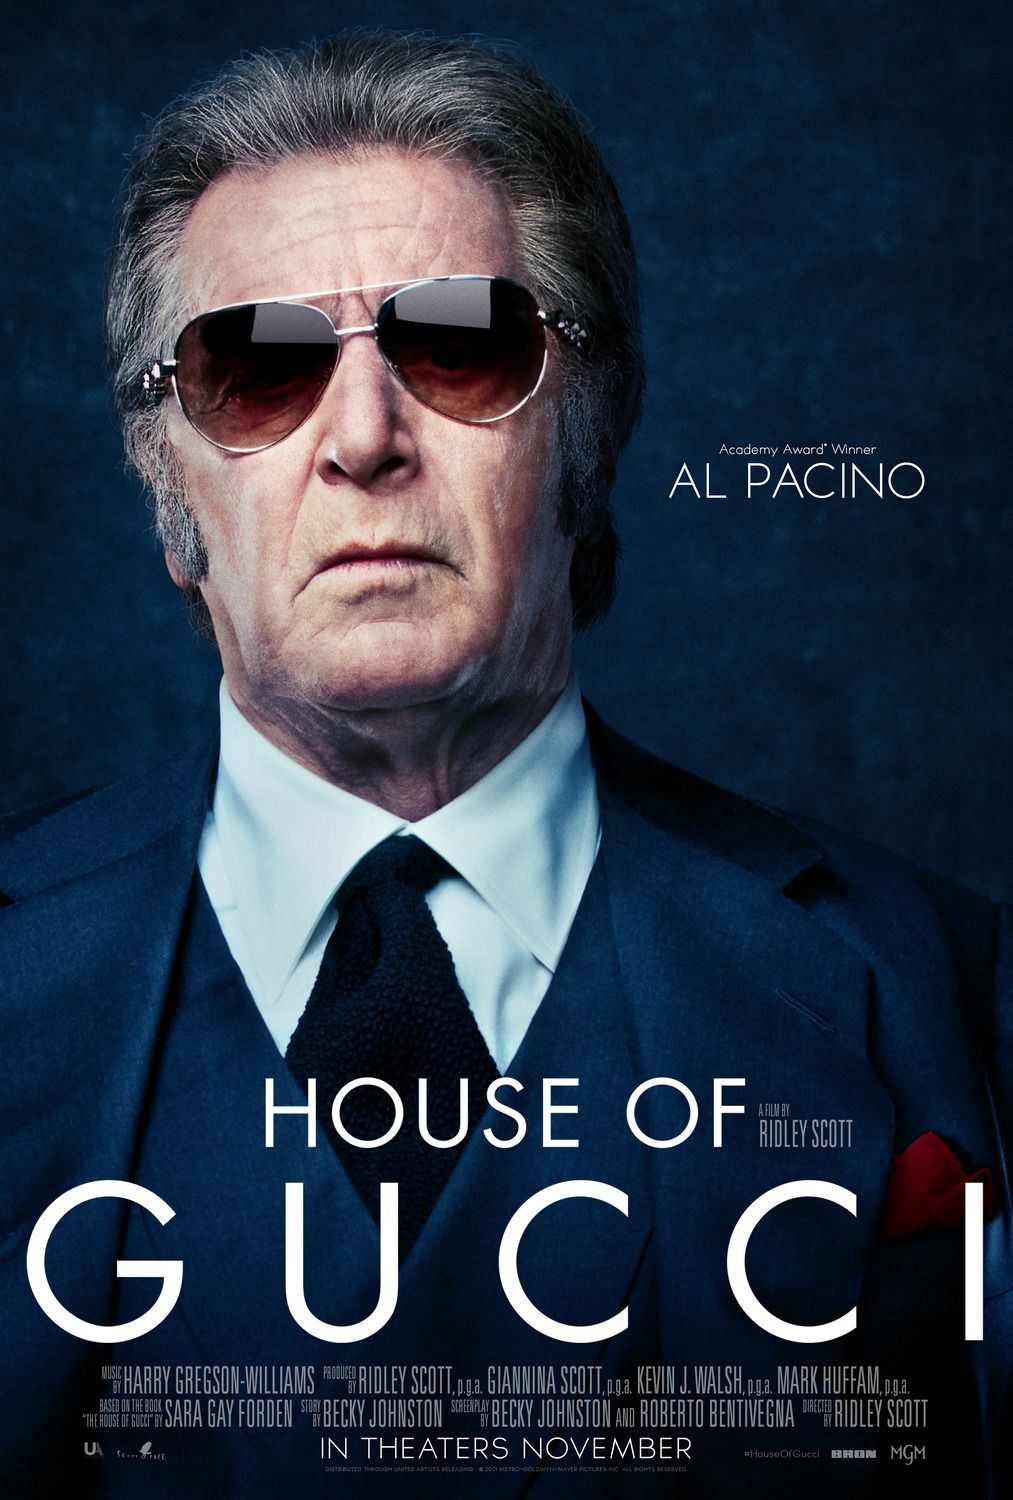 House of Gucci poster #3 Al Pacino